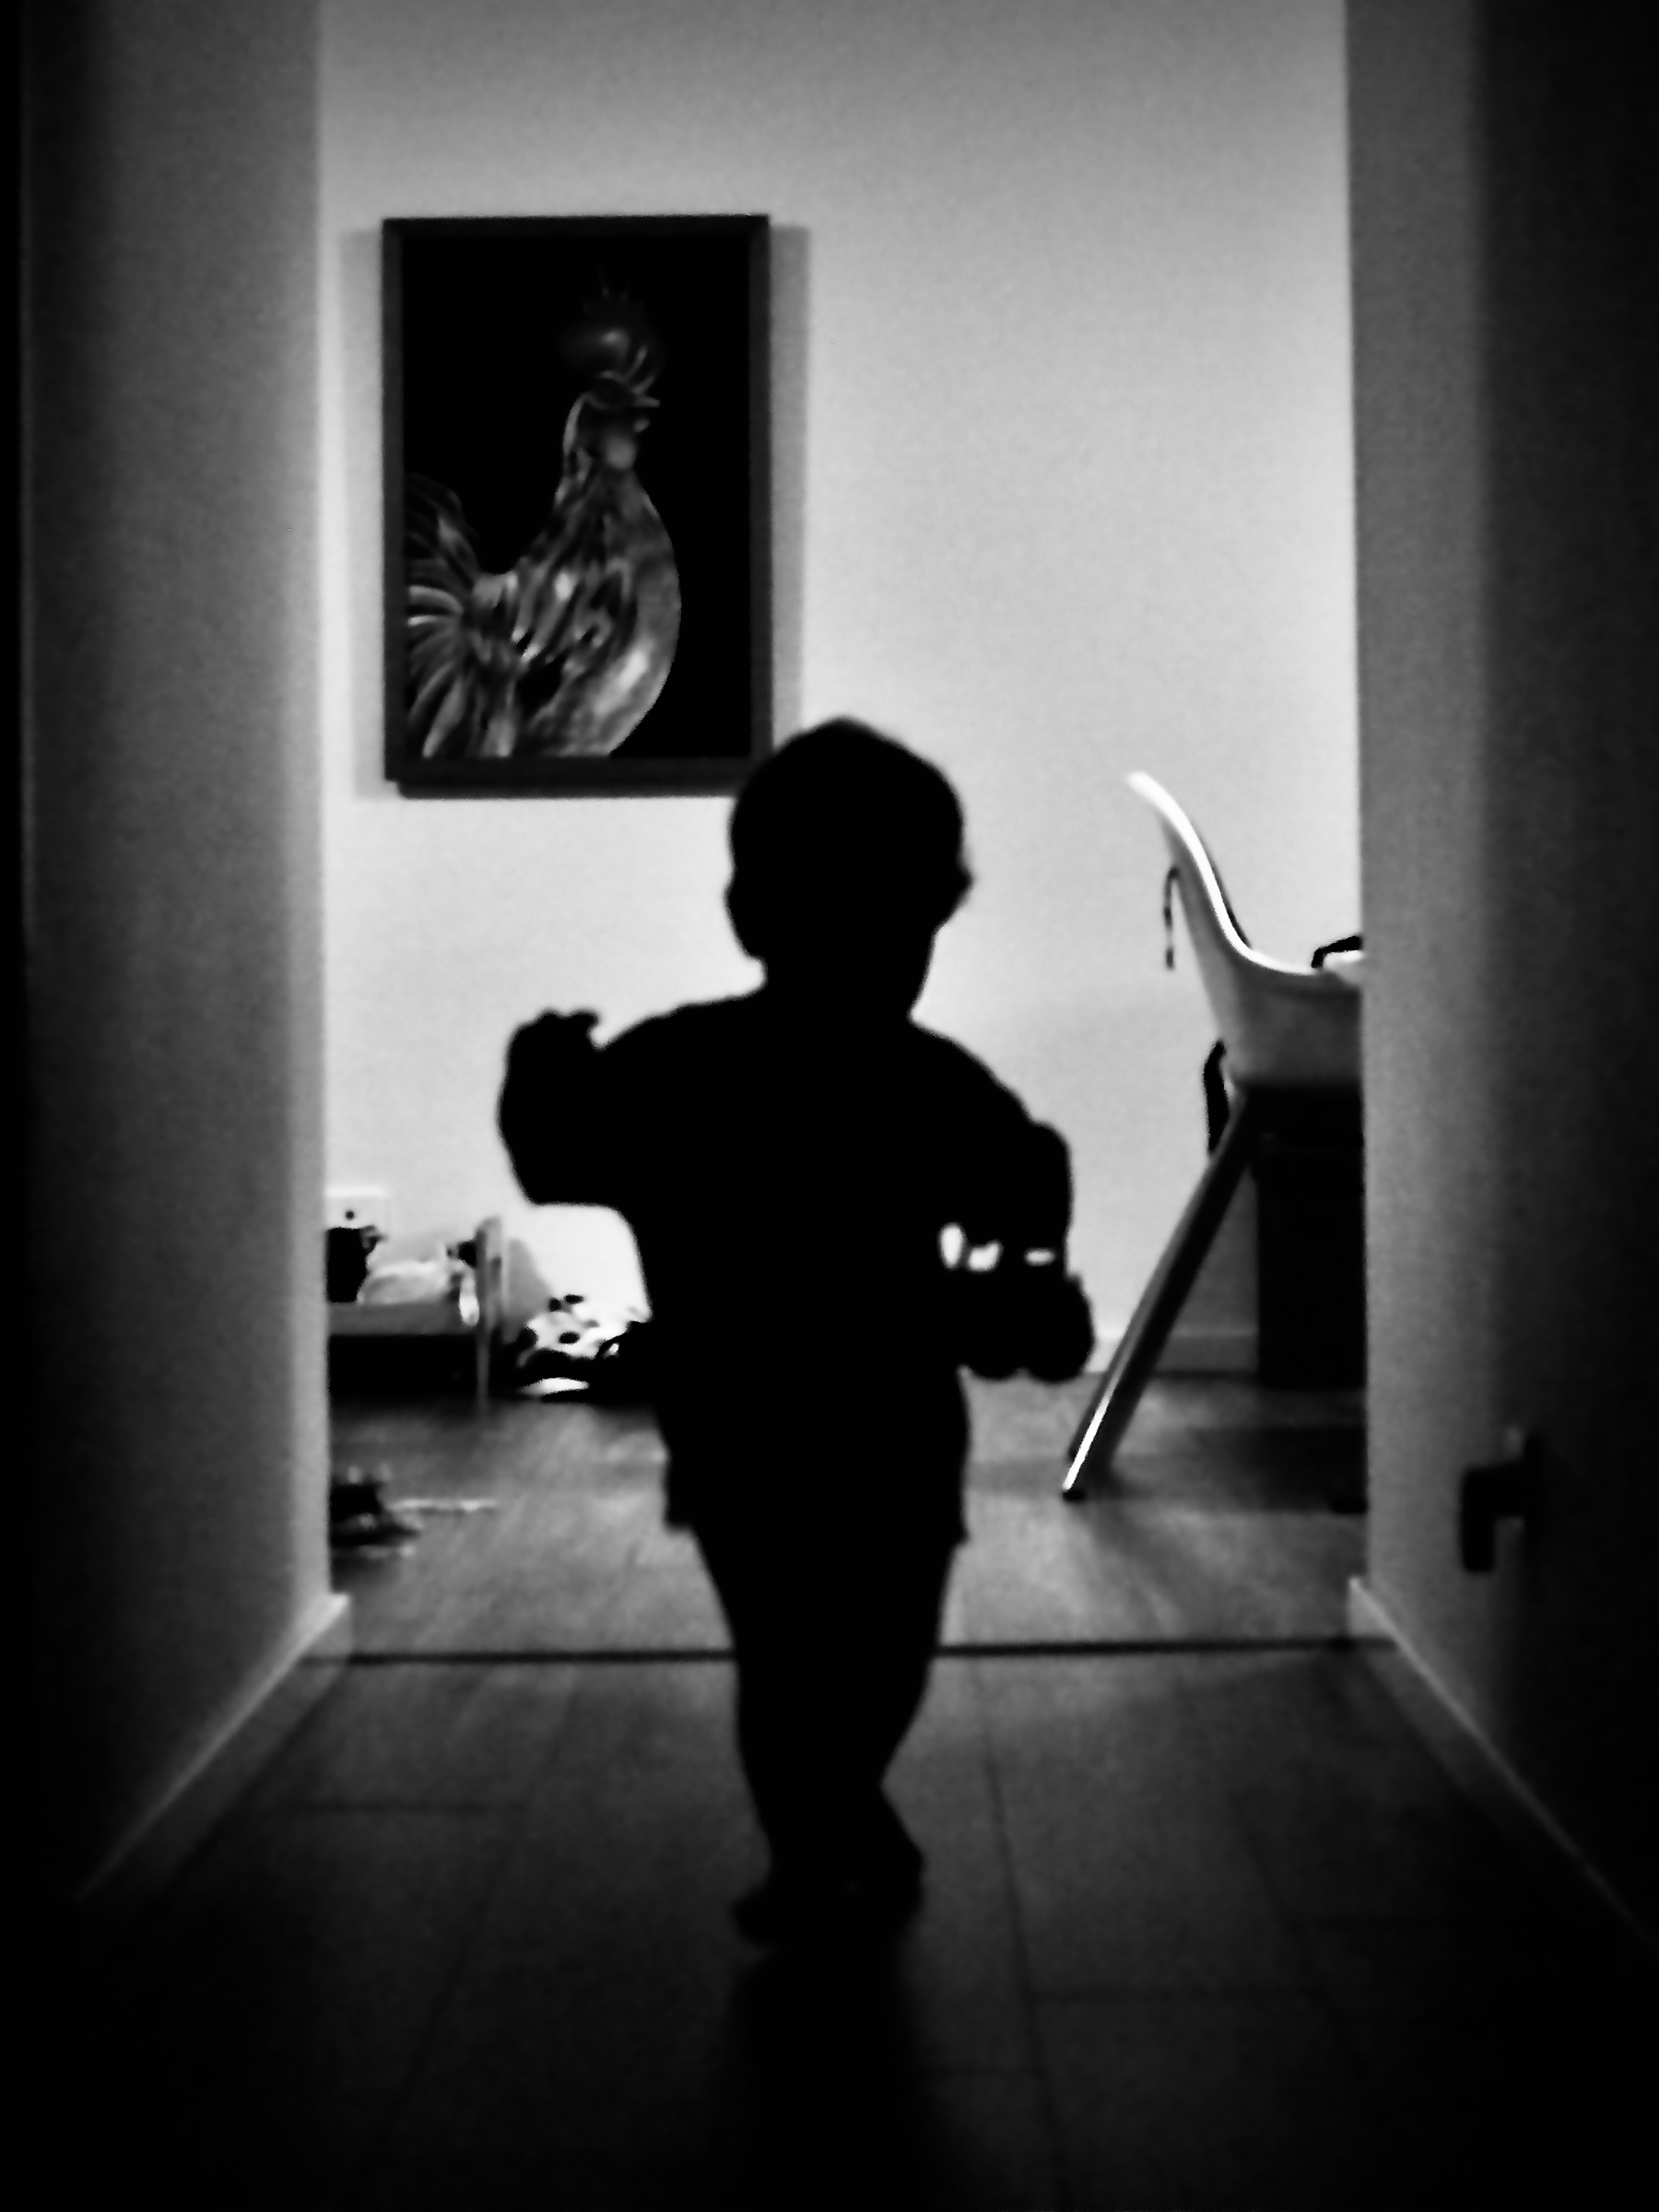 A silhouette of a toddler running down a hallway towards the camera, with a painting of a rooster in the background